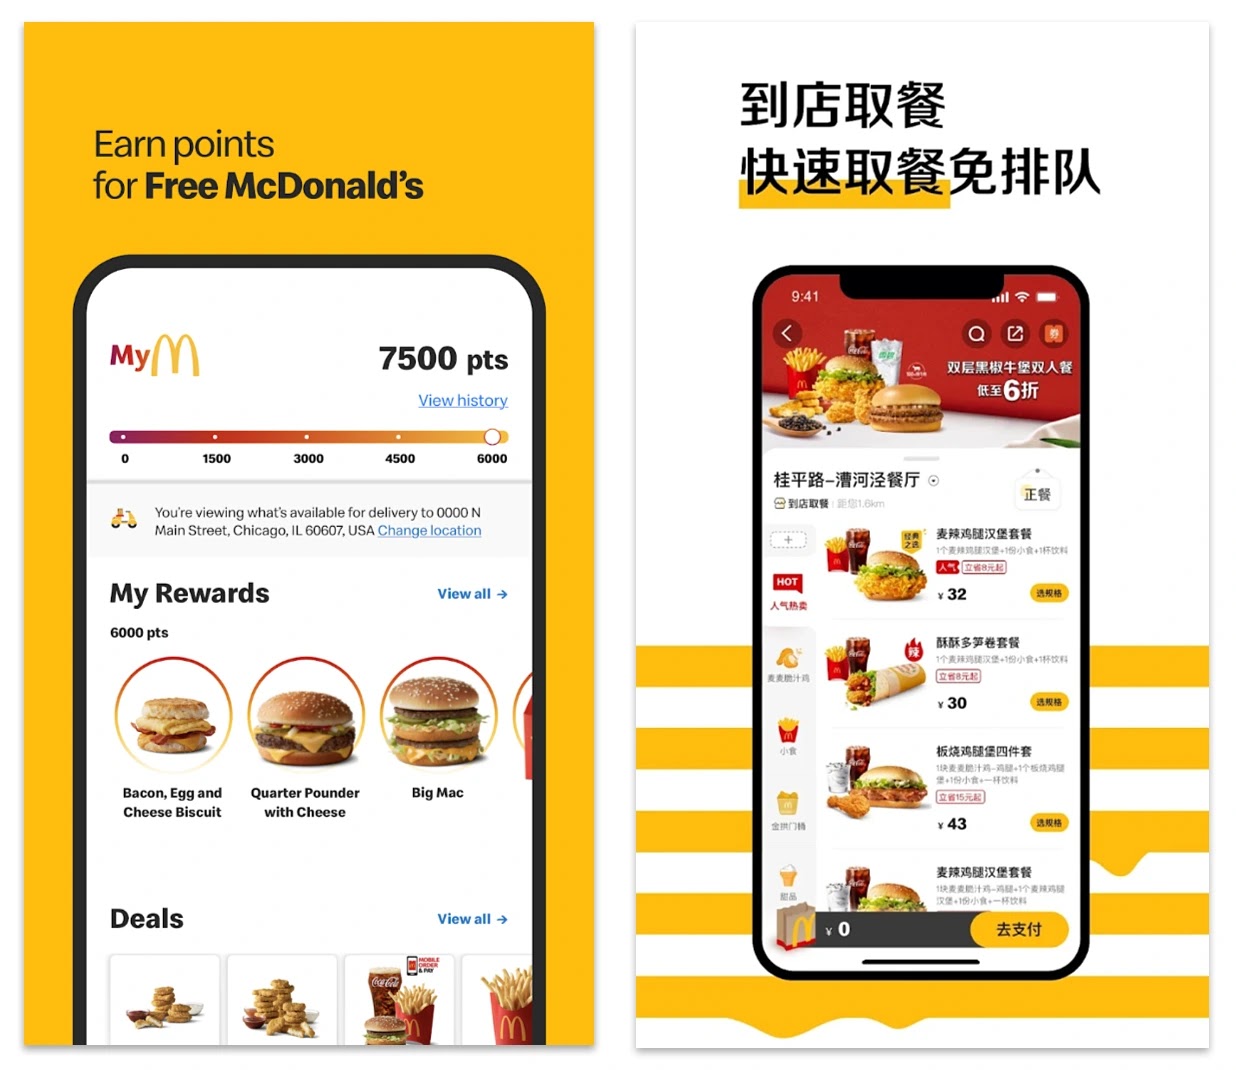 McDonald's app beforehand   successful  the U.S. (left) and China (right)